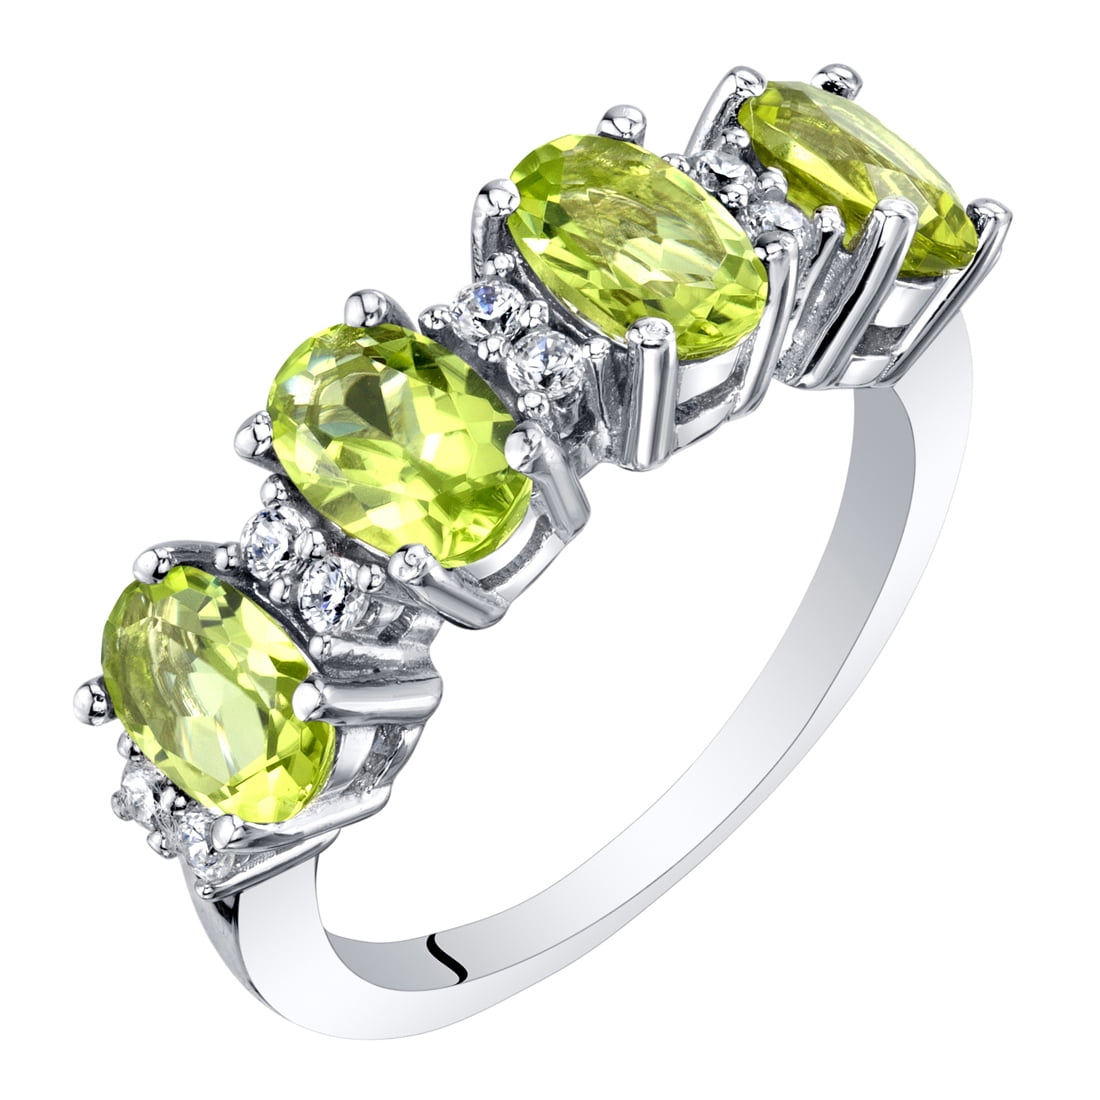 Gem Stone King 925 Sterling Silver Green Peridot 3-Stone Ring for Women 2.11 Ct Oval Gemstone Birthstone, Available in size 5, 6, 7, 8, 9